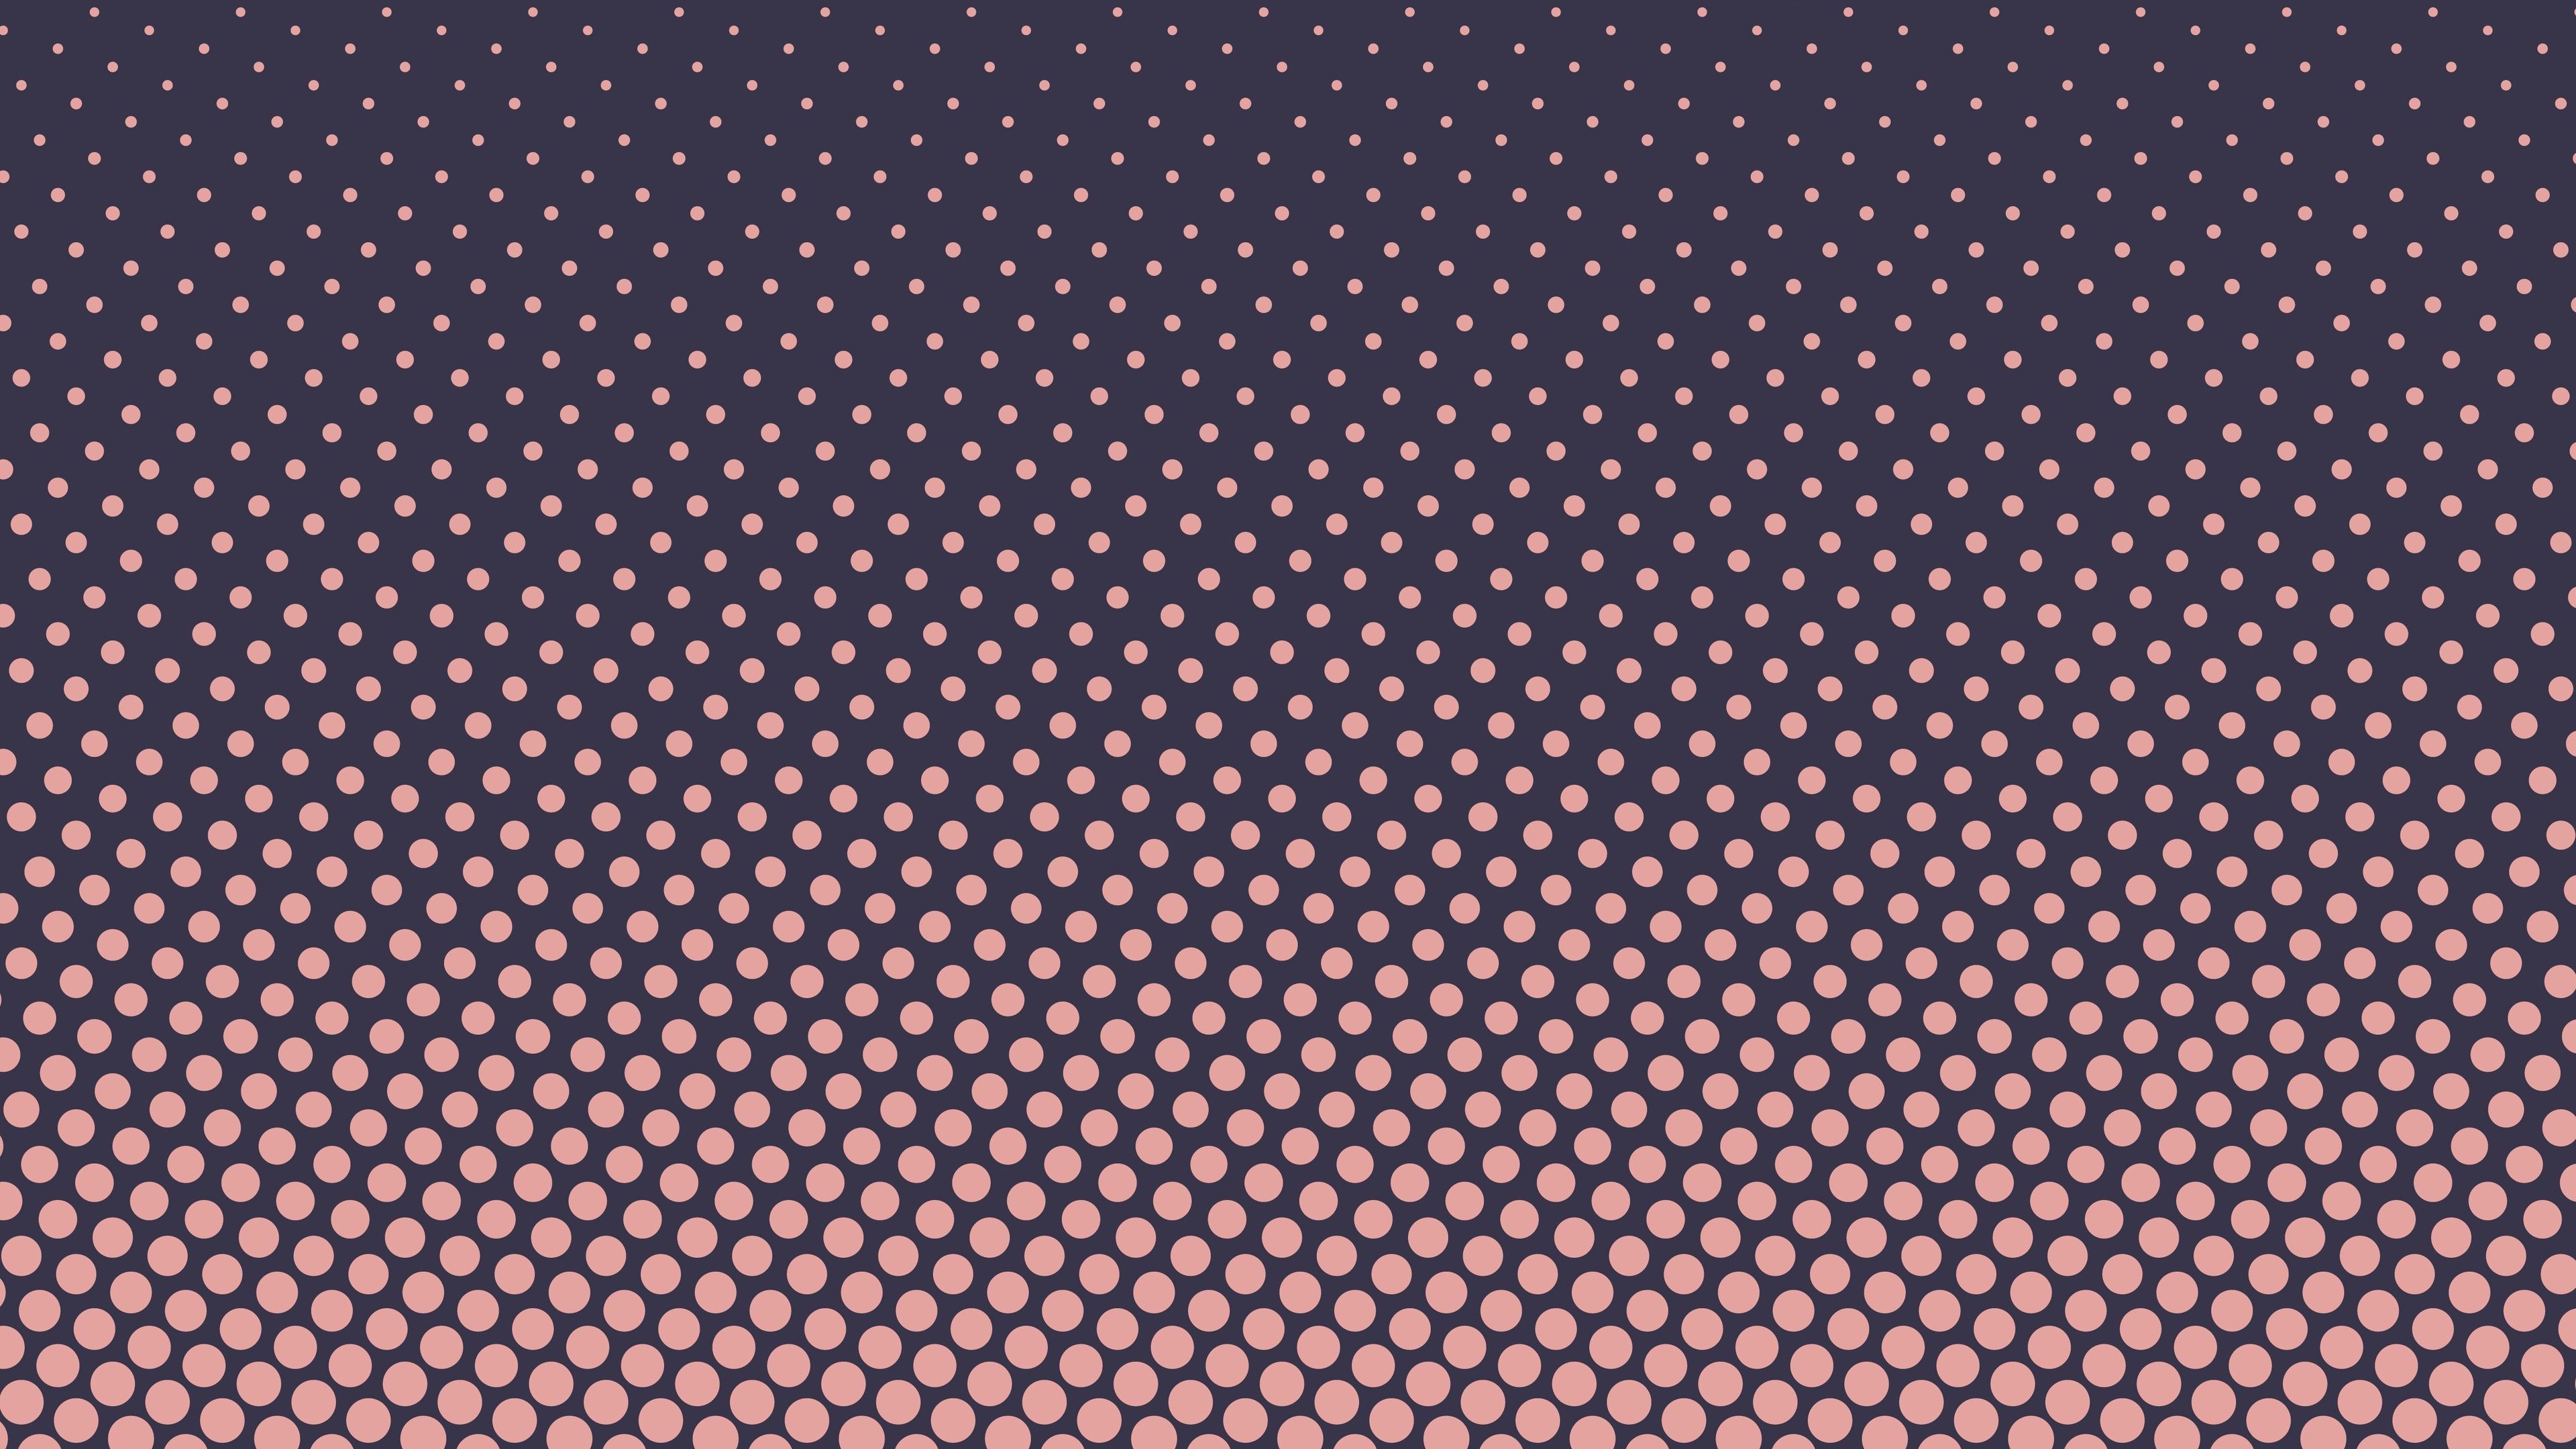 Abstract Dots Texture Simple 5k Texture Wallpaper, Simple Background Wallpaper, Hd Wallpaper, Dots Wall. Dots Wallpaper, Abstract Wallpaper, Textured Wallpaper